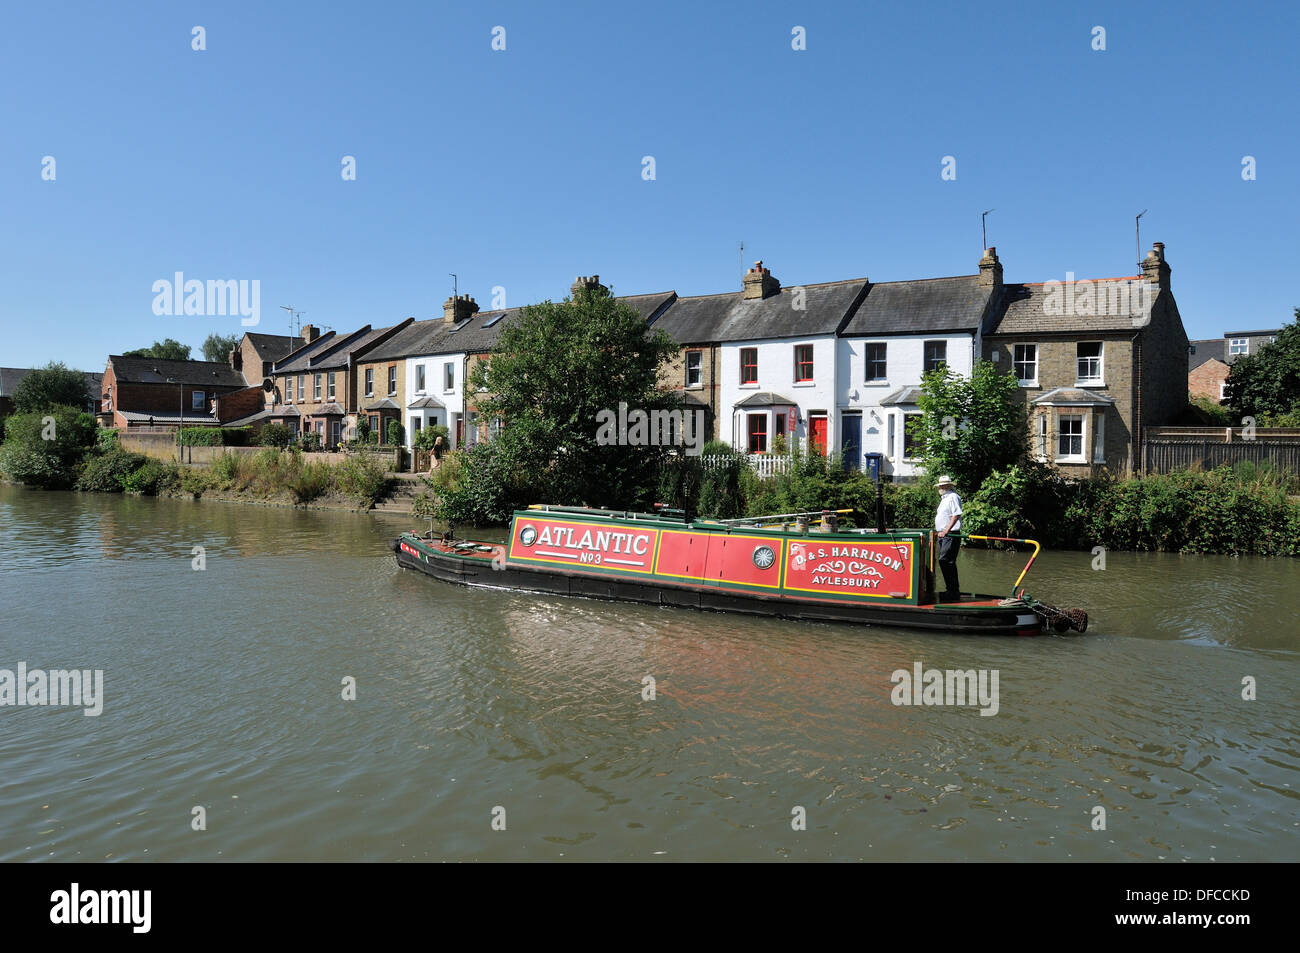 Narrowboat an der Themse in zentrale Oxford UK. Stockfoto